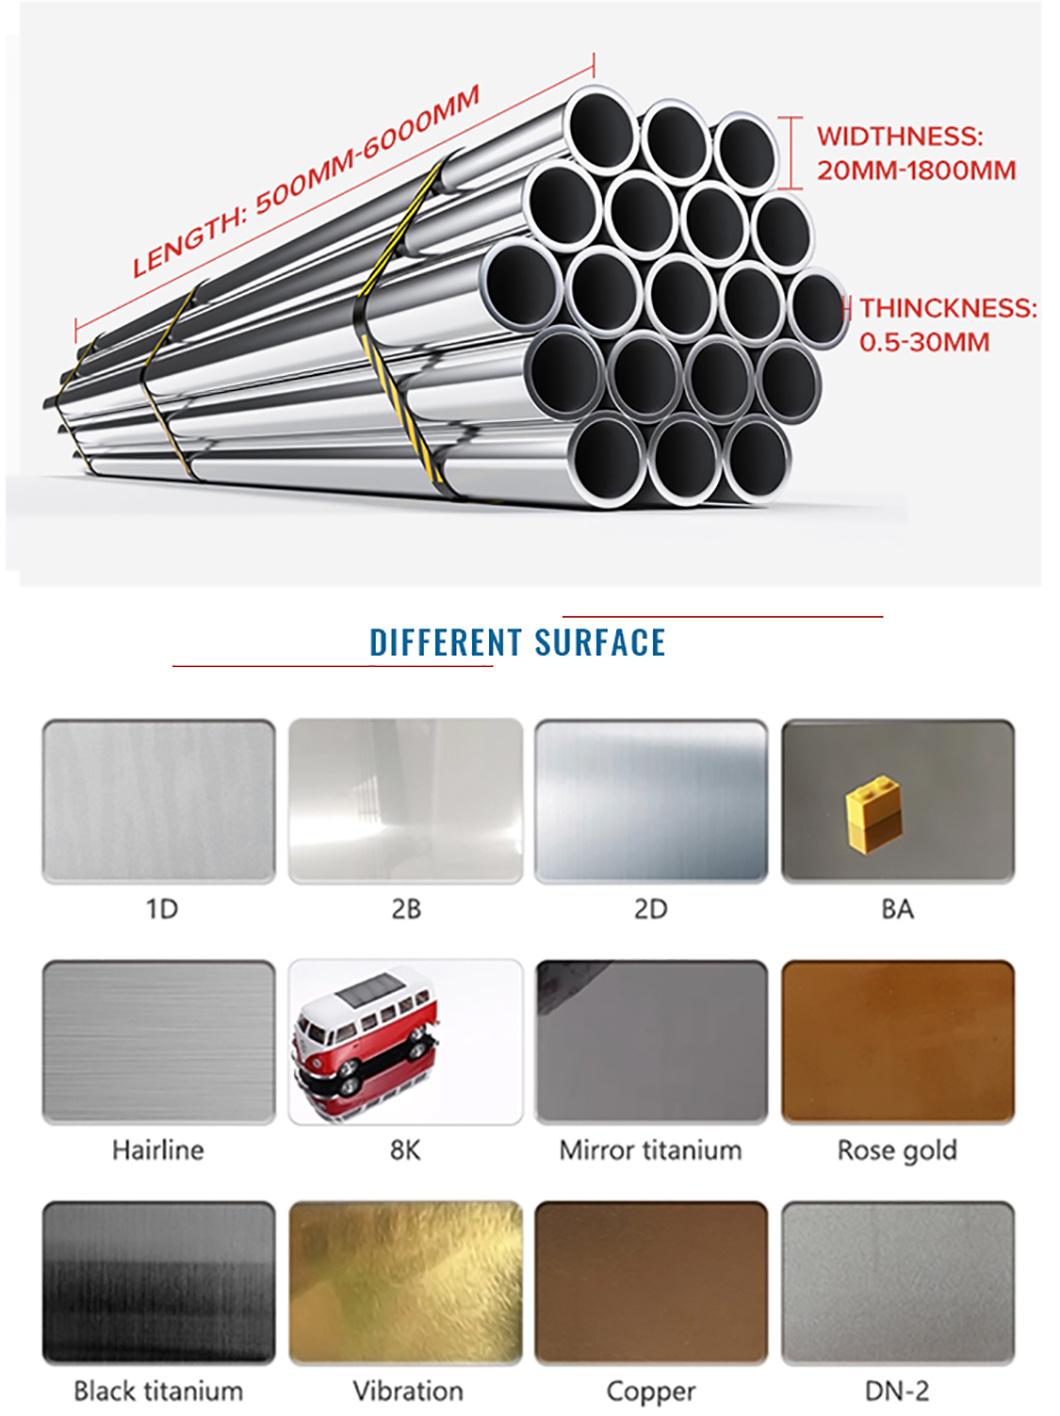 China Manufactures Ss 304/316L/2205/310S Seamless Stainless Steel Pipe